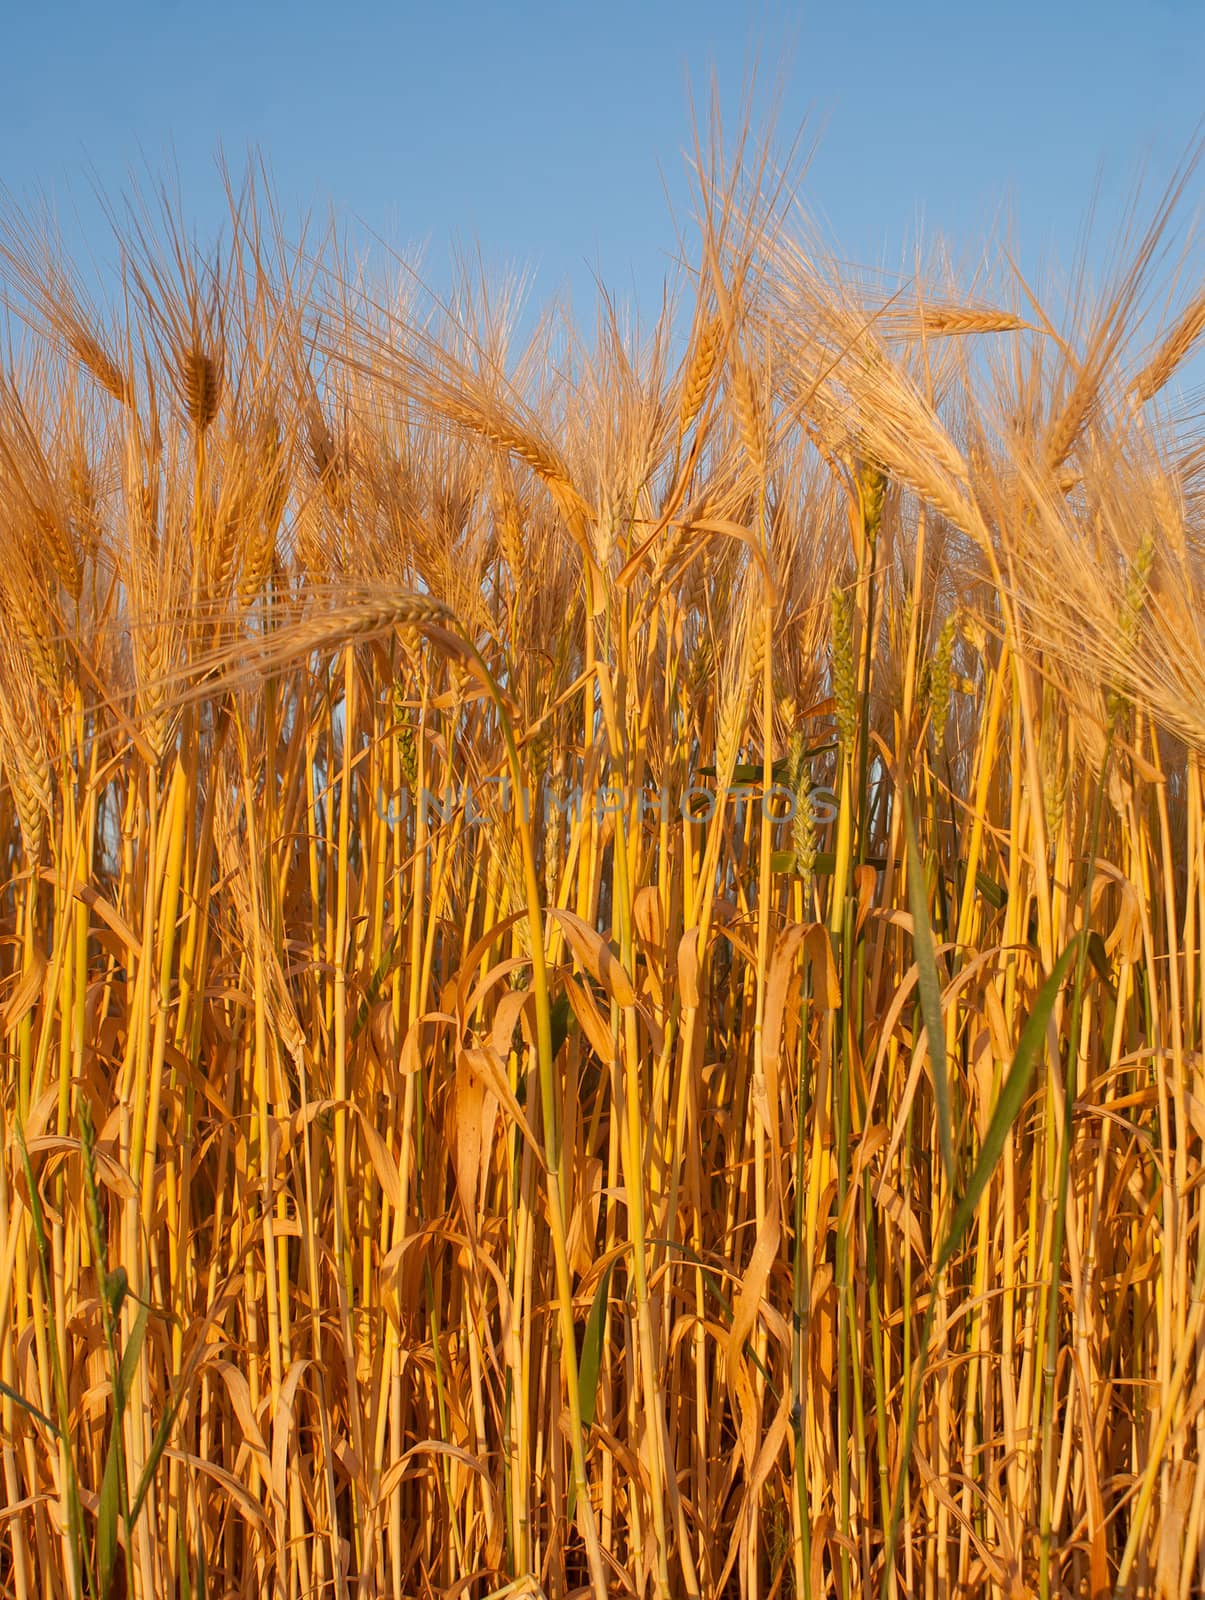 Wheat ear against blue sky by AndreyKr